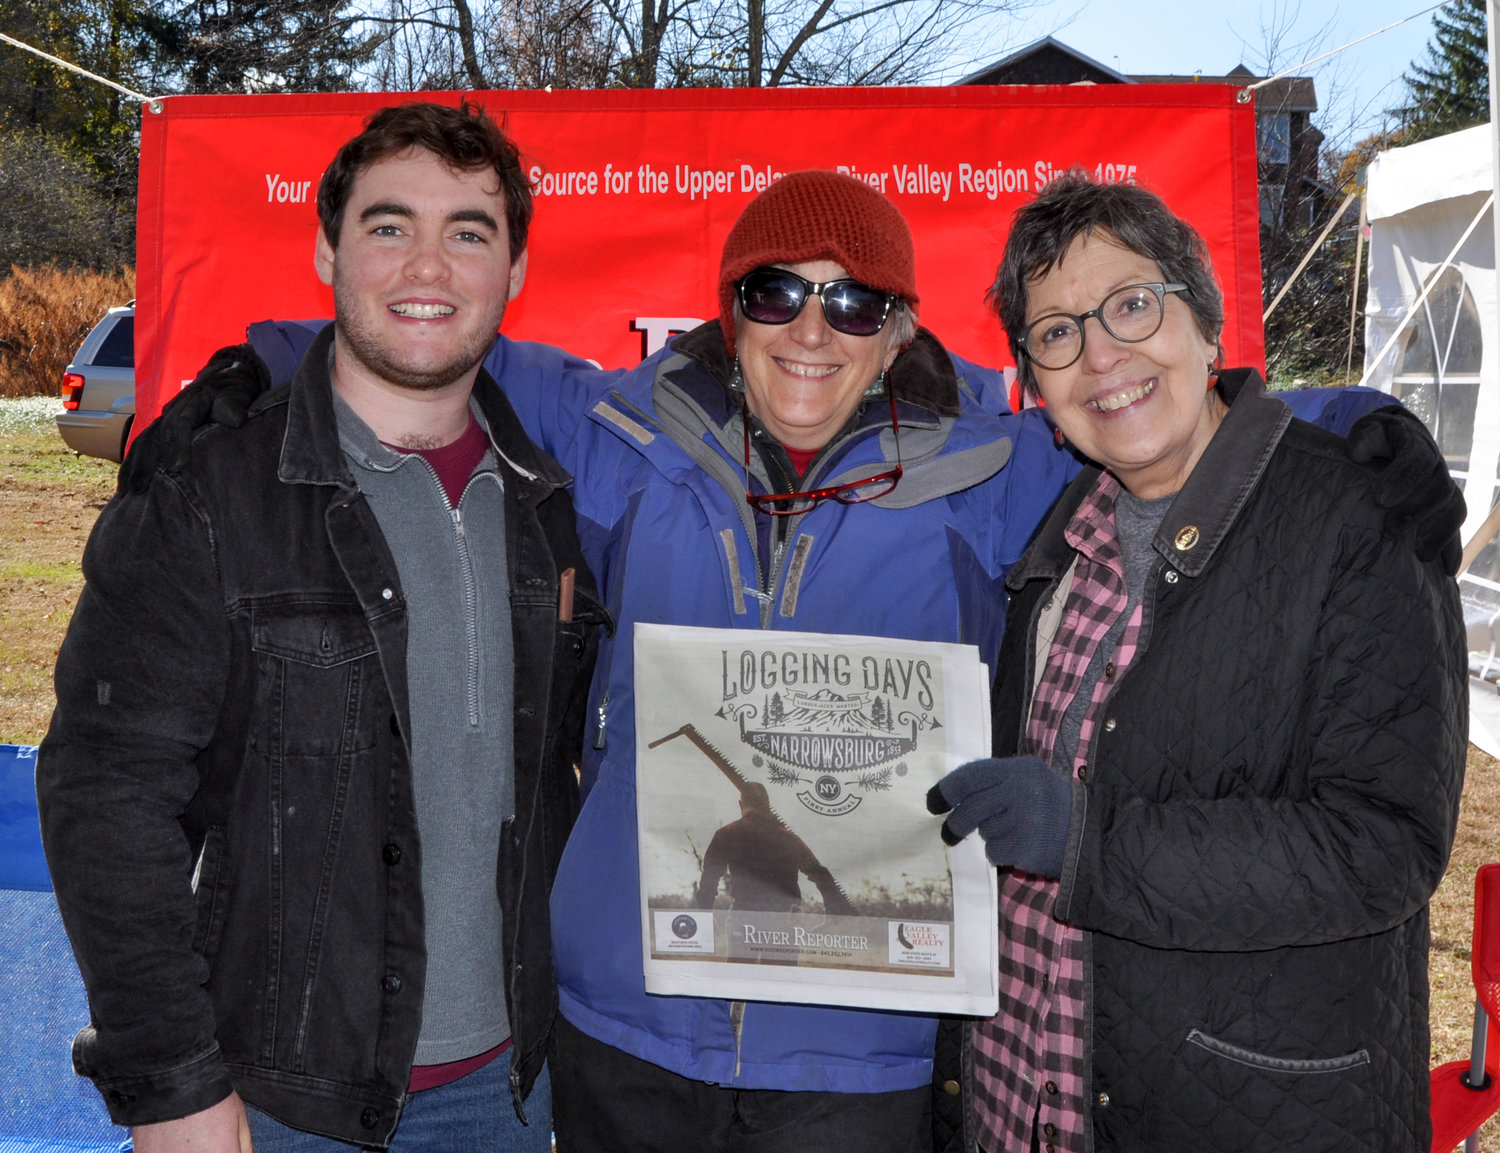 I like the folks I work with, which comes in handy when I run into co-workers like Owen Walsh, left, and Barbara Winfield, seen here flanking TRR publisher Laurie Stuart. All of us were out to celebrate the inaugural Narrowsburg Logging Days: a true highlight of 2019. Can’t wait for next year!